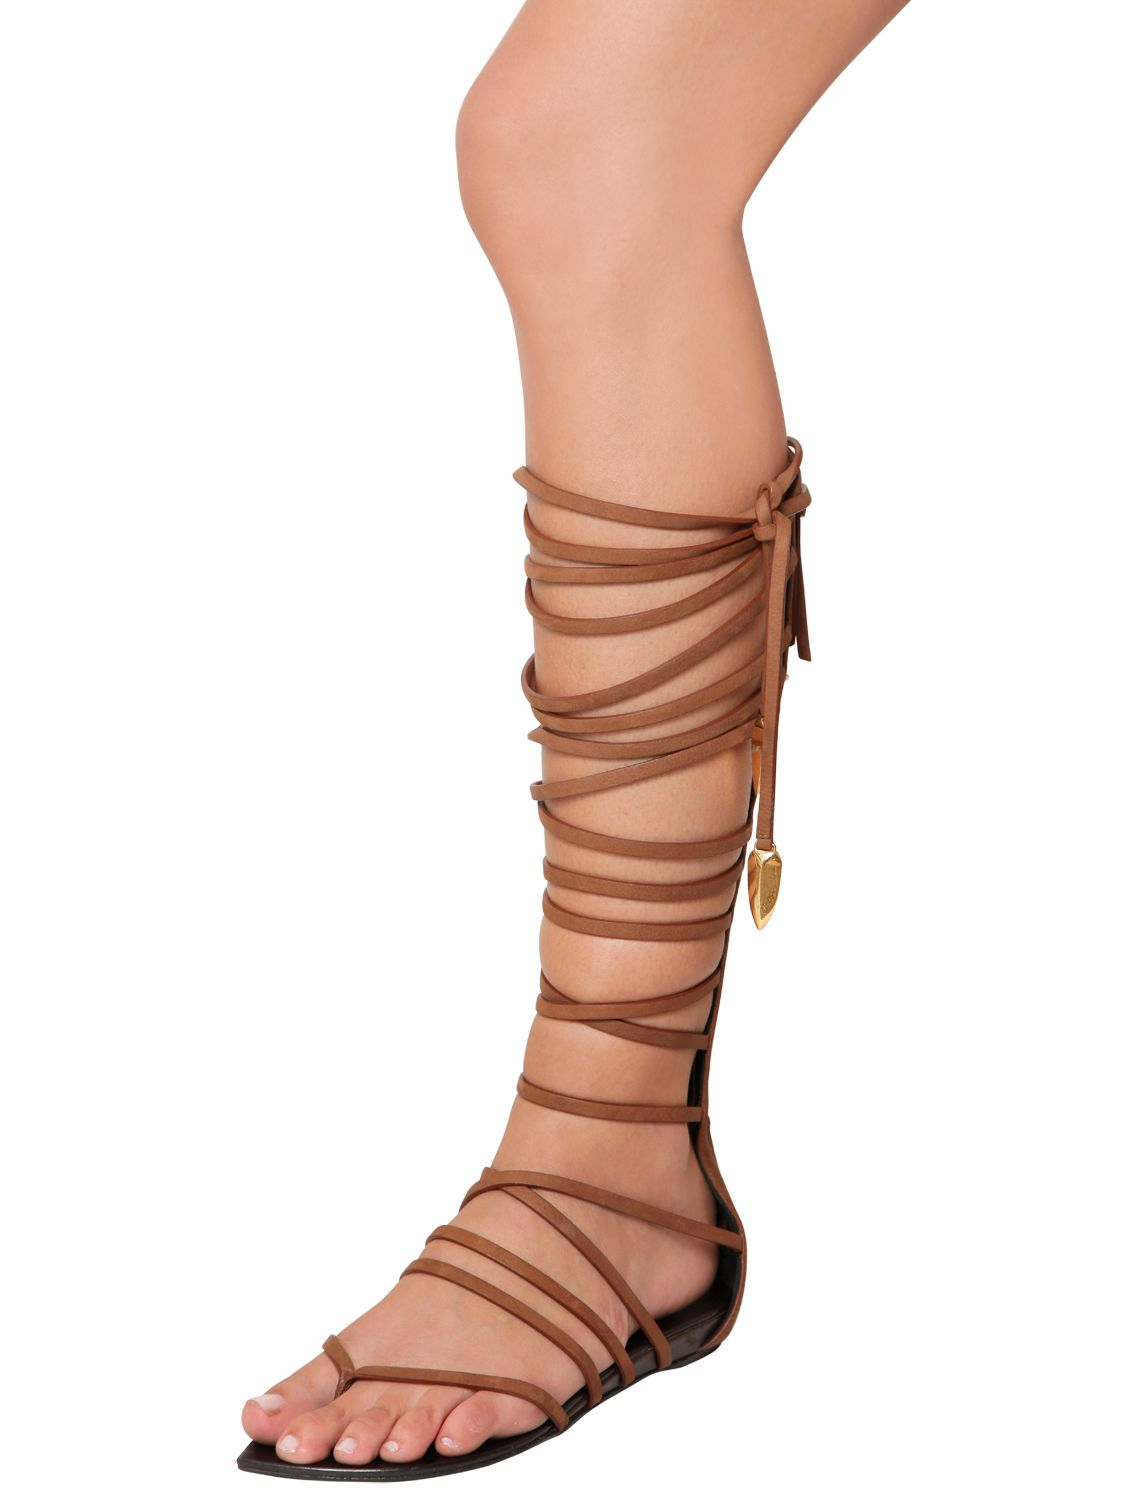 Lyst - Giuseppe Zanotti Lace-Up Leather Gladiator Sandals in Brown